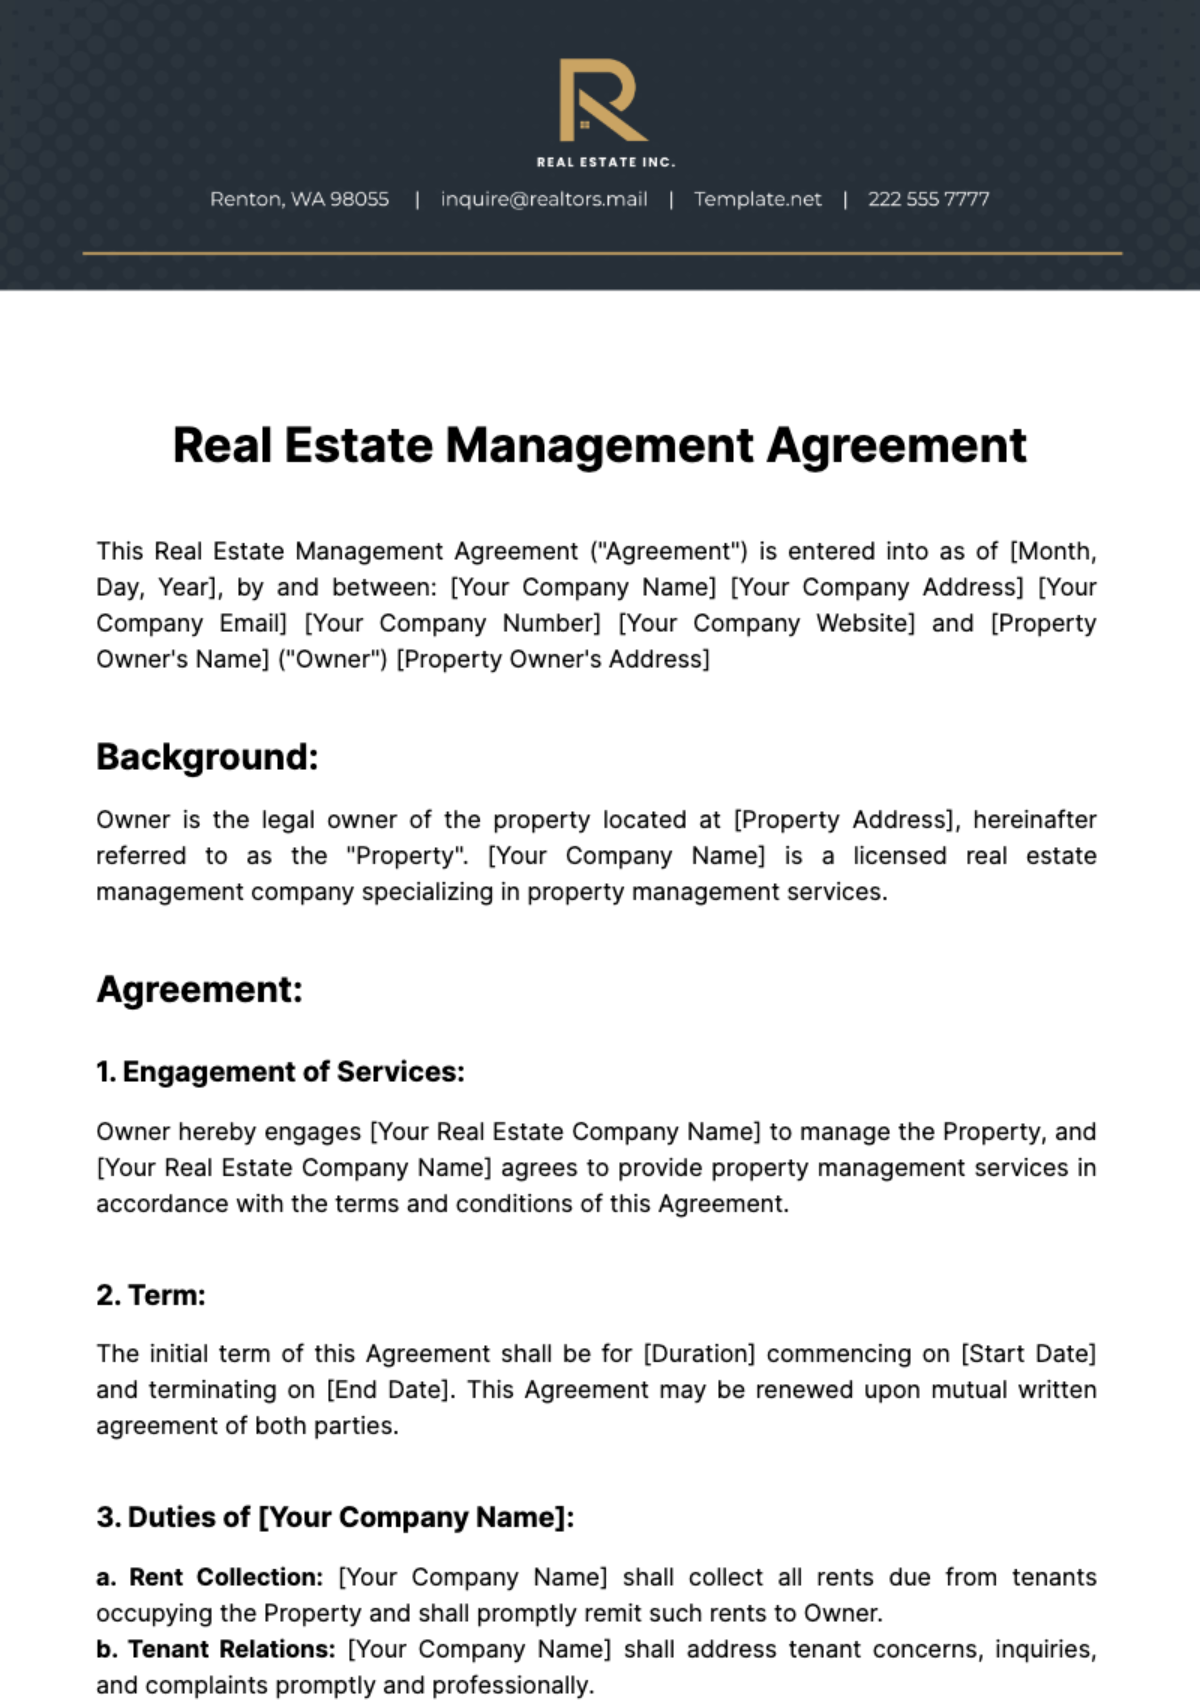 Real Estate Management Agreement Template